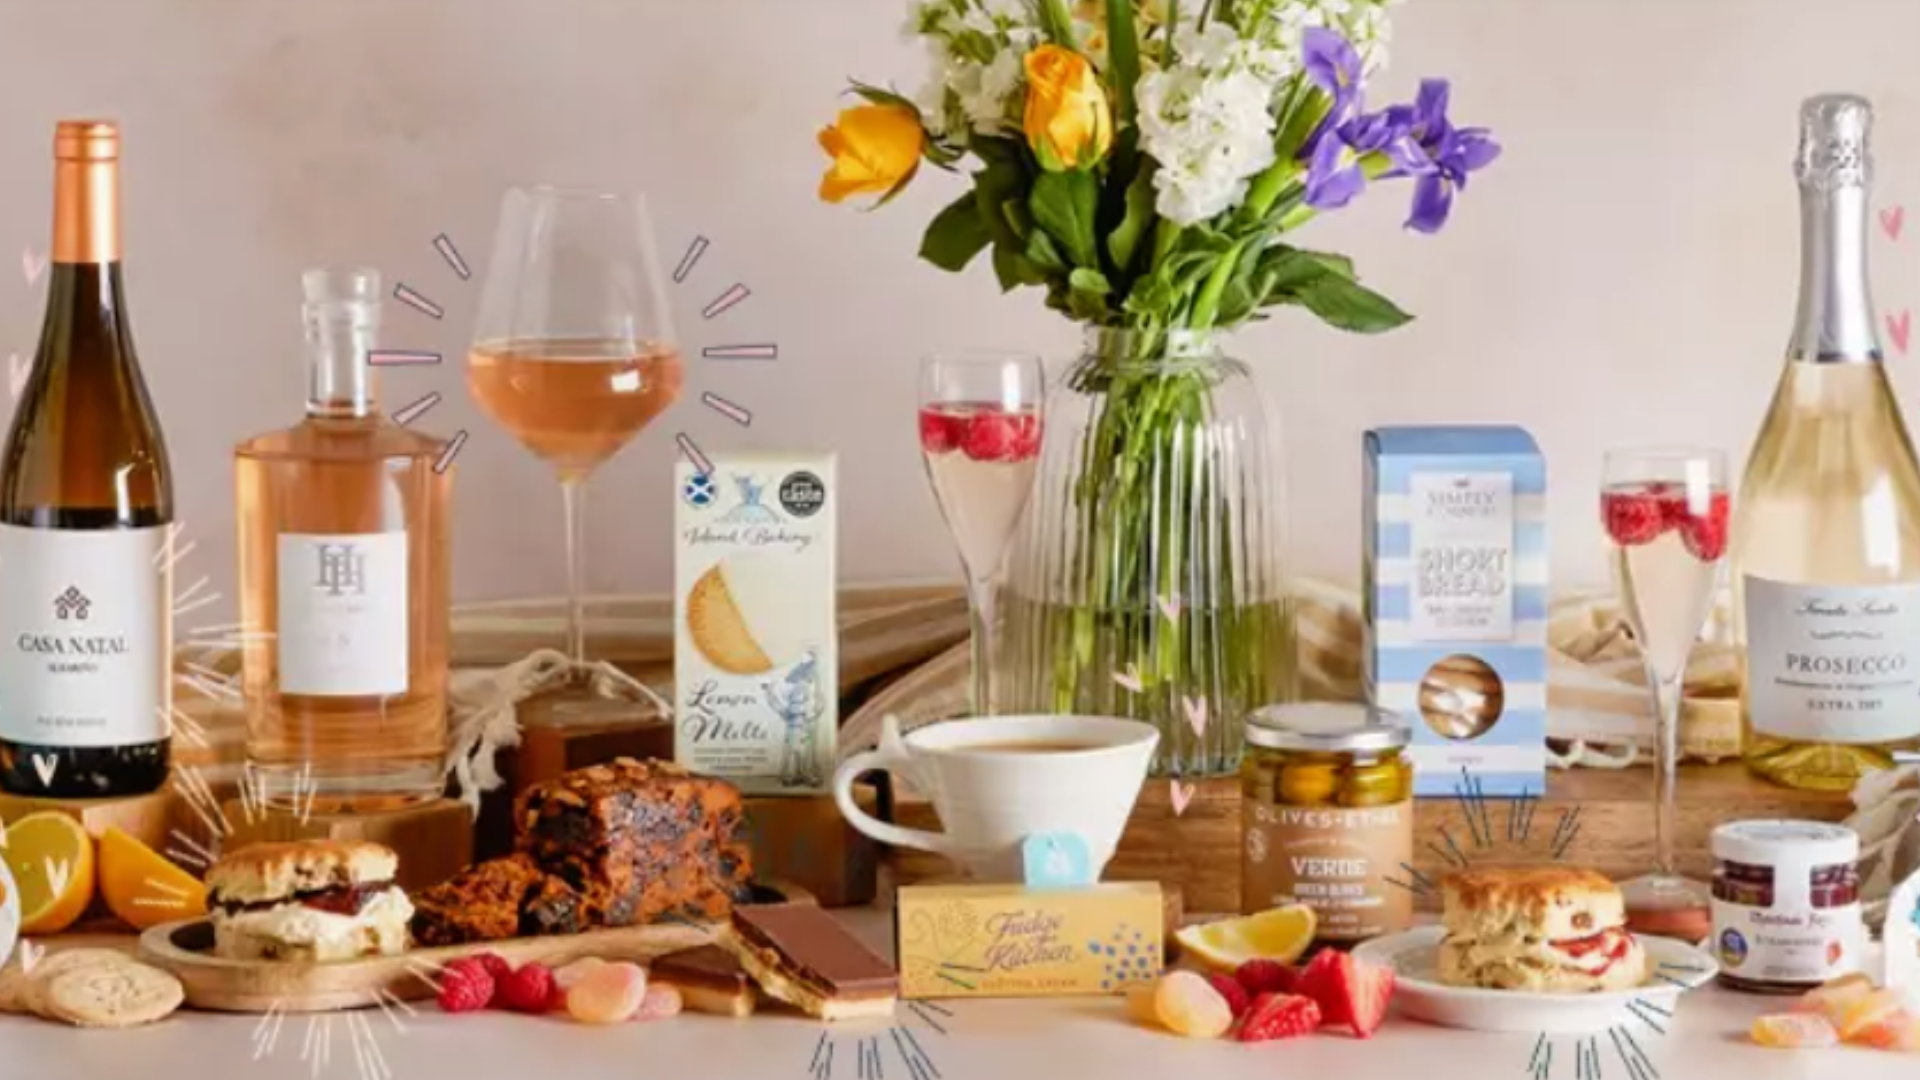 Mother's Day hamper contents and ideas for afternoon cream tea